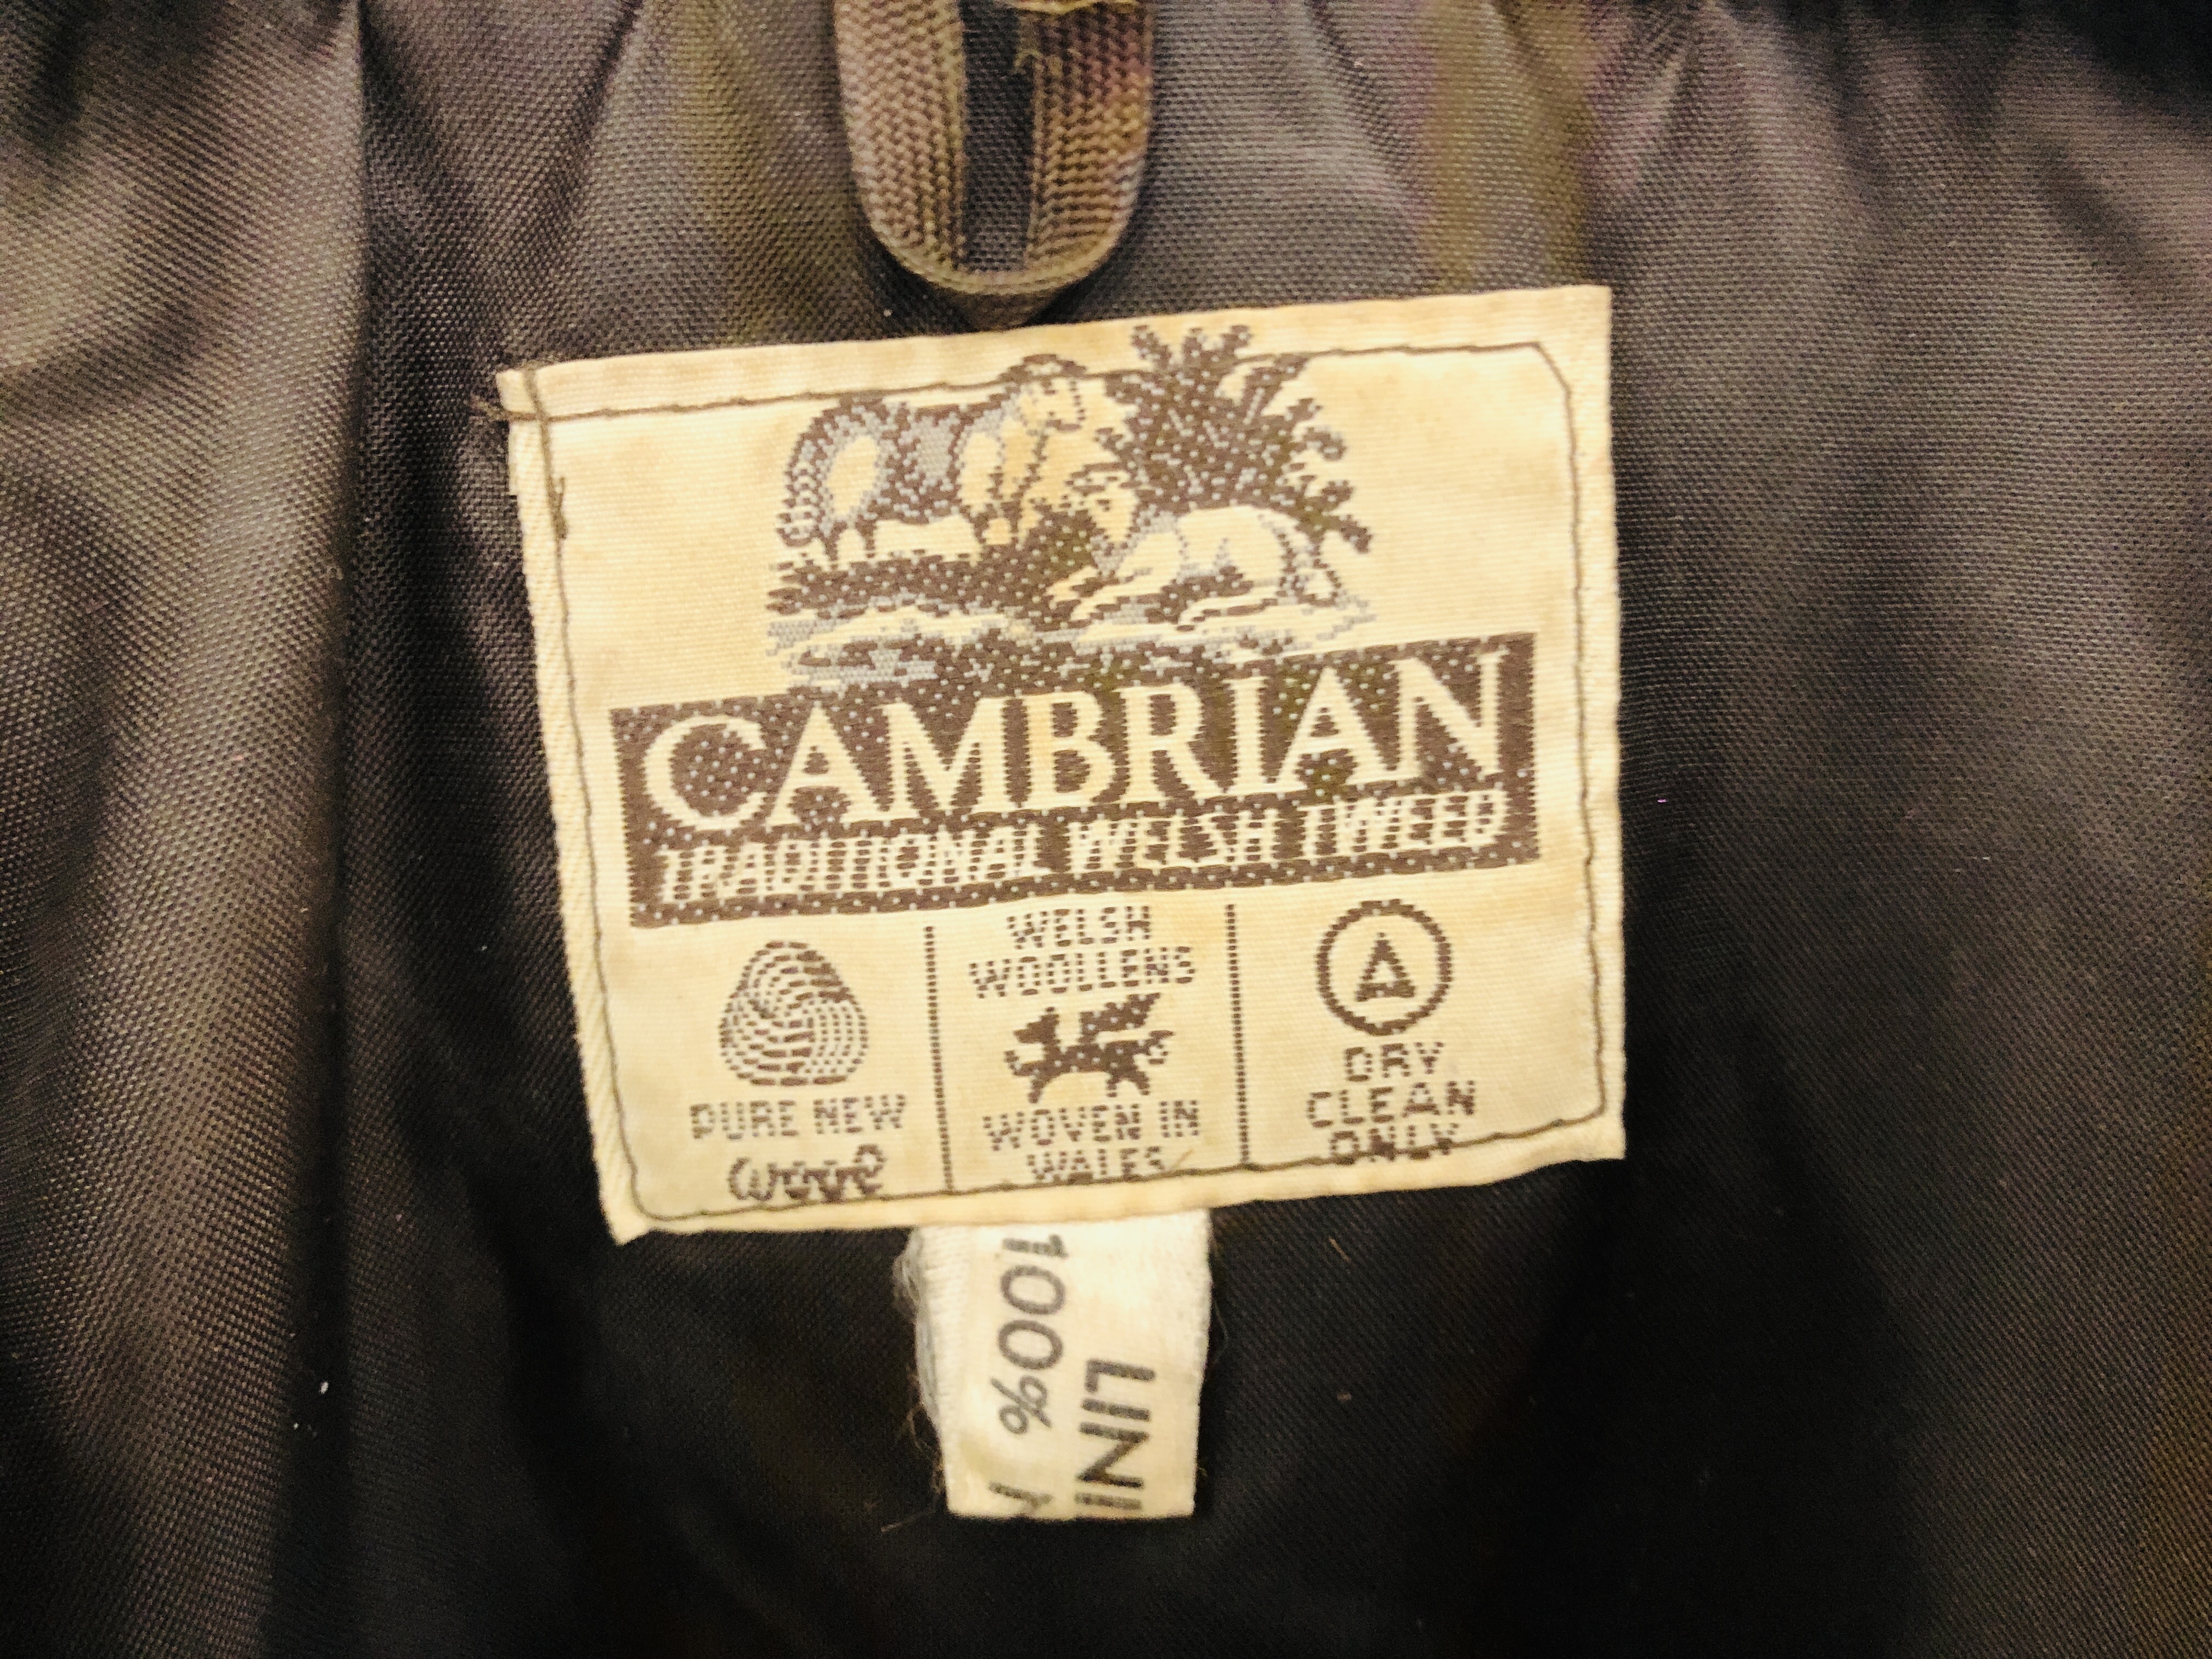 A VINTAGE CAMBRIAN TRADITIONAL WELSH TWEED CAPE. - Image 2 of 4